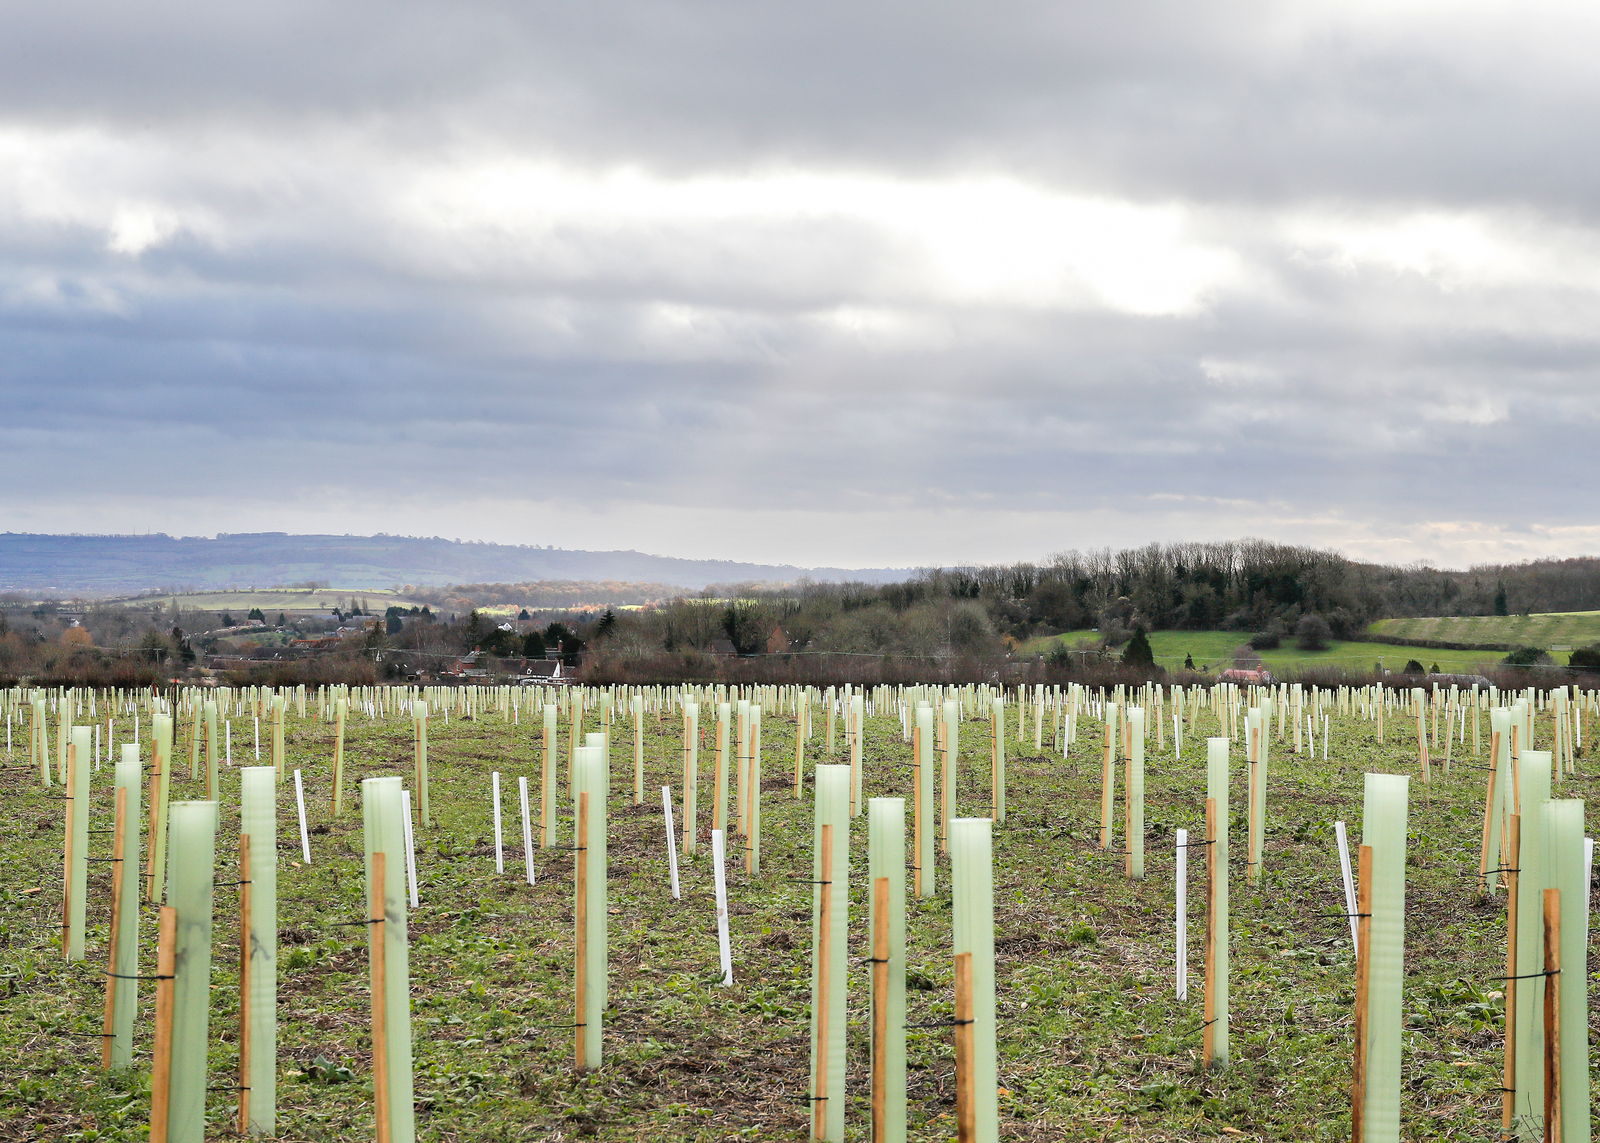 View of a field of newly planted trees in white protective guards with fields, hills and mature trees in the distance